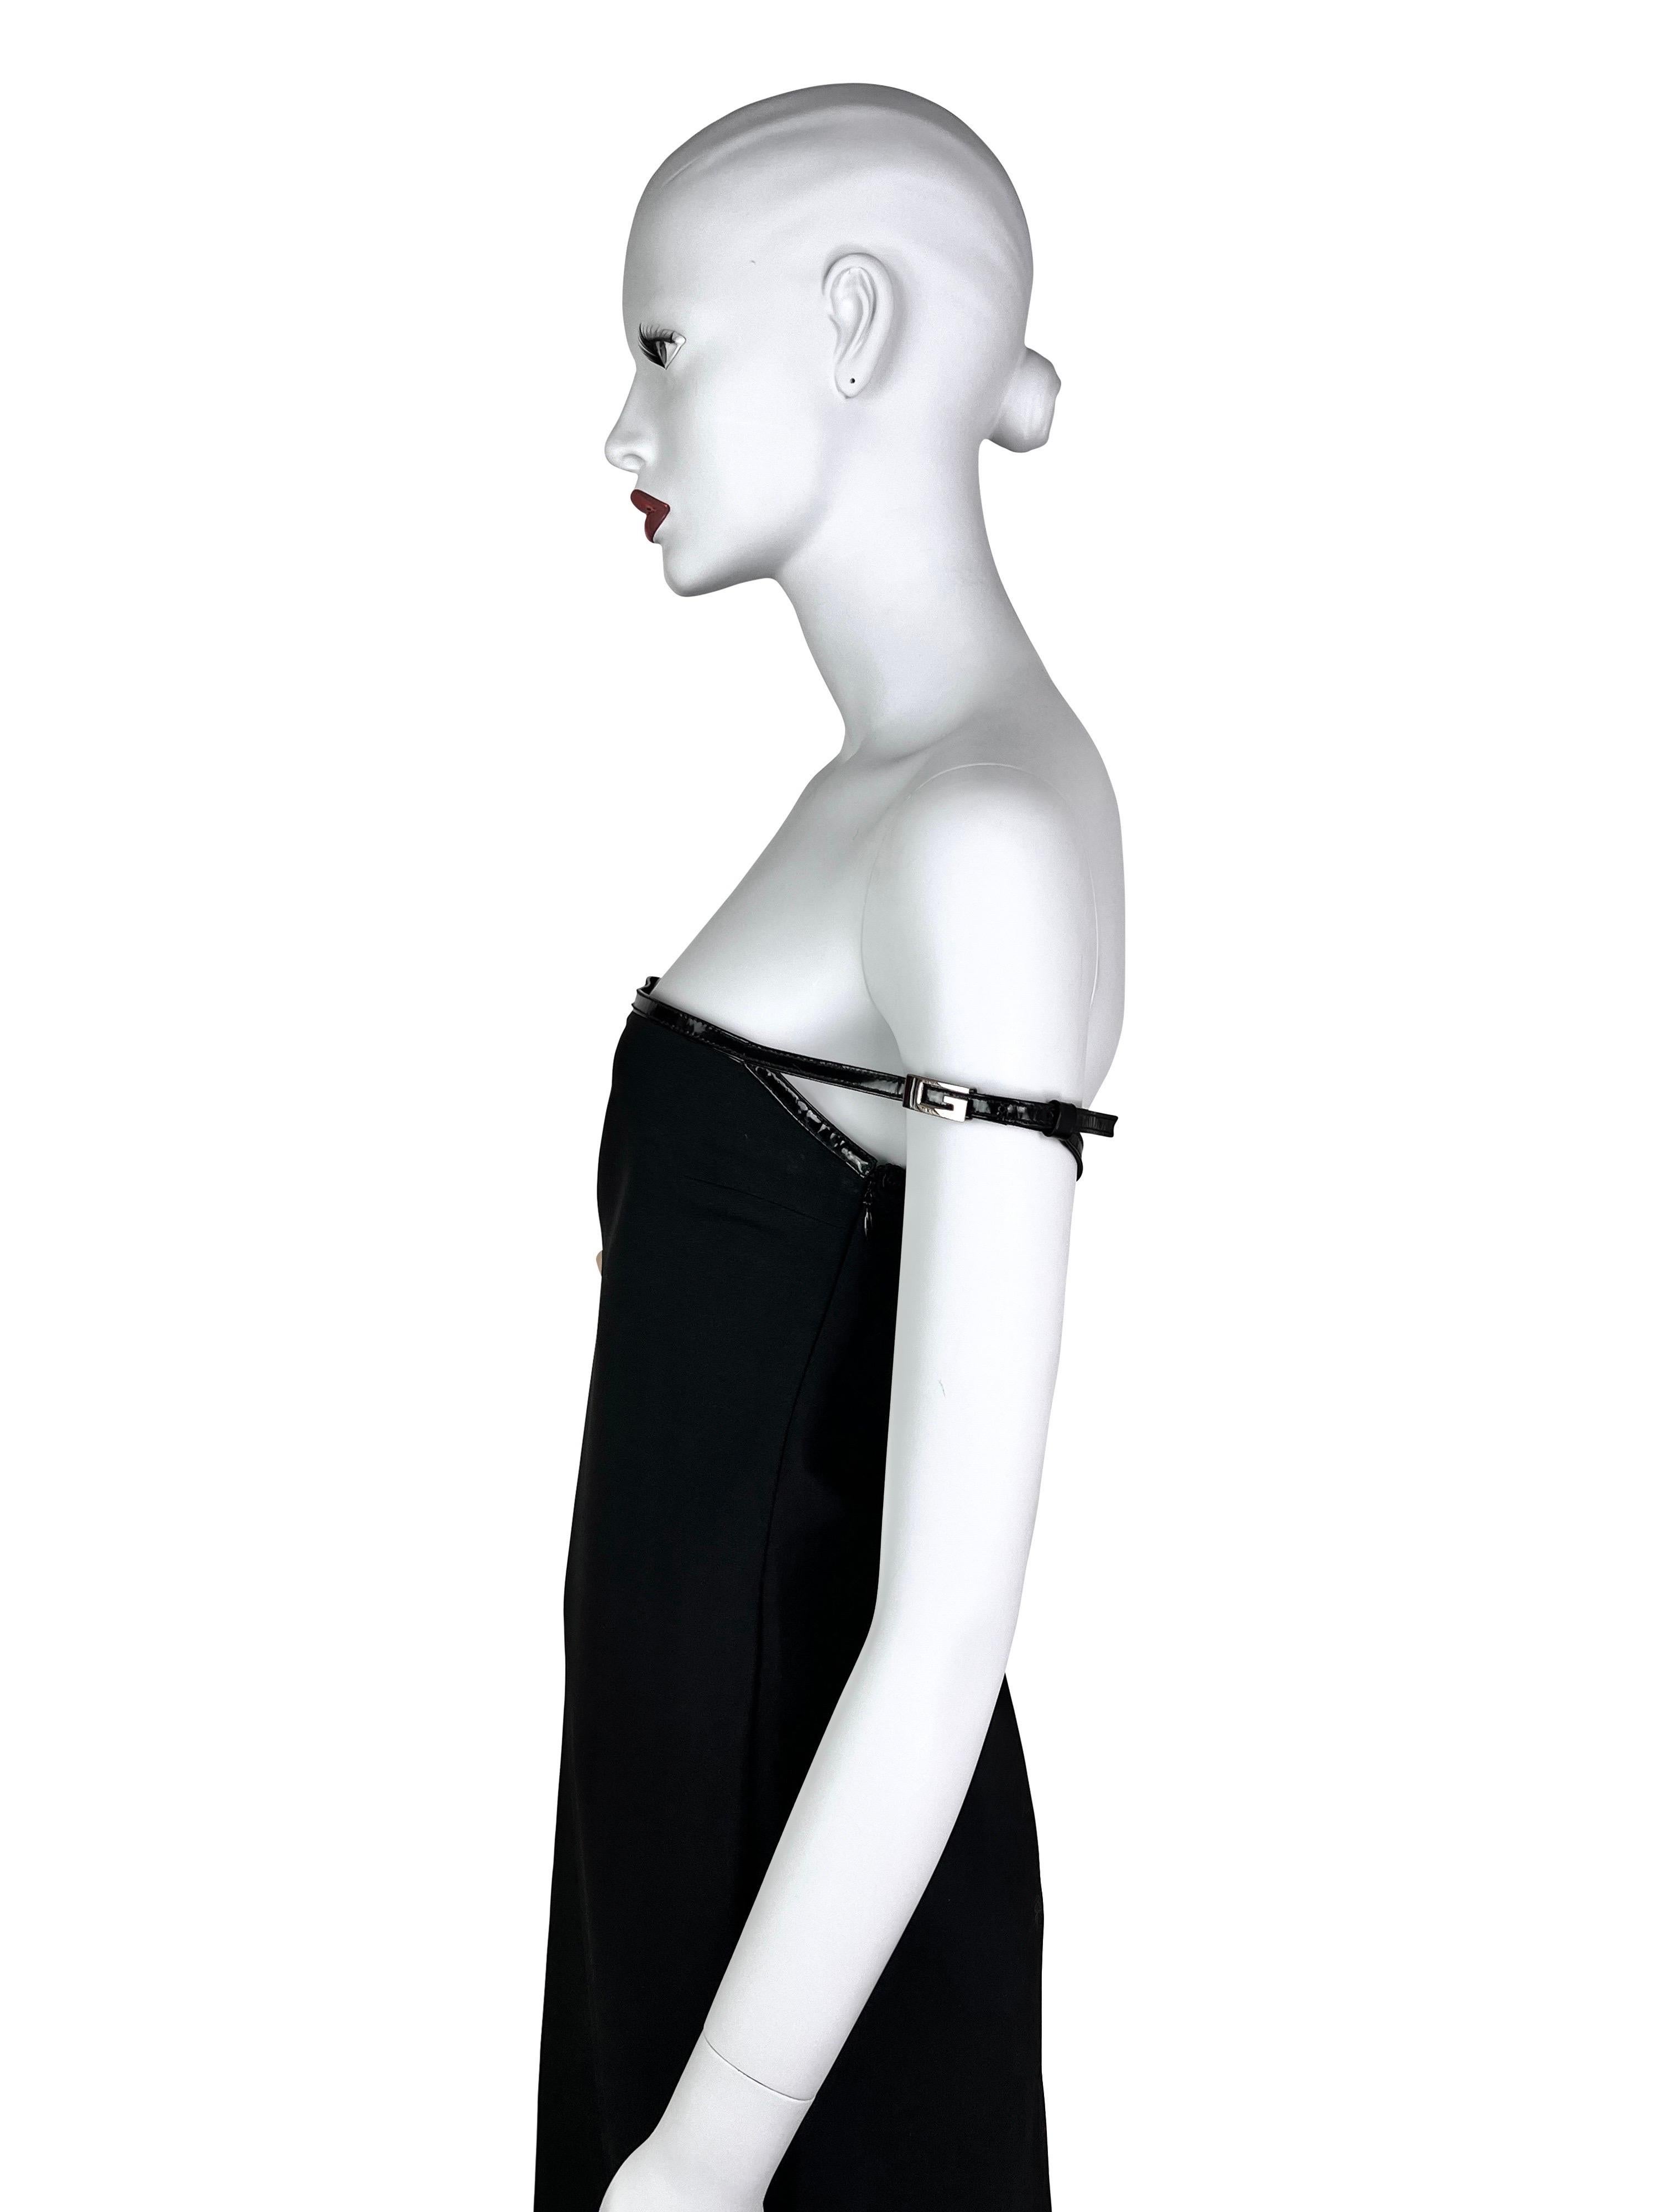 Gucci by Tom Ford Fall 1997 G-logo Strap Evening Black Dress For Sale 6